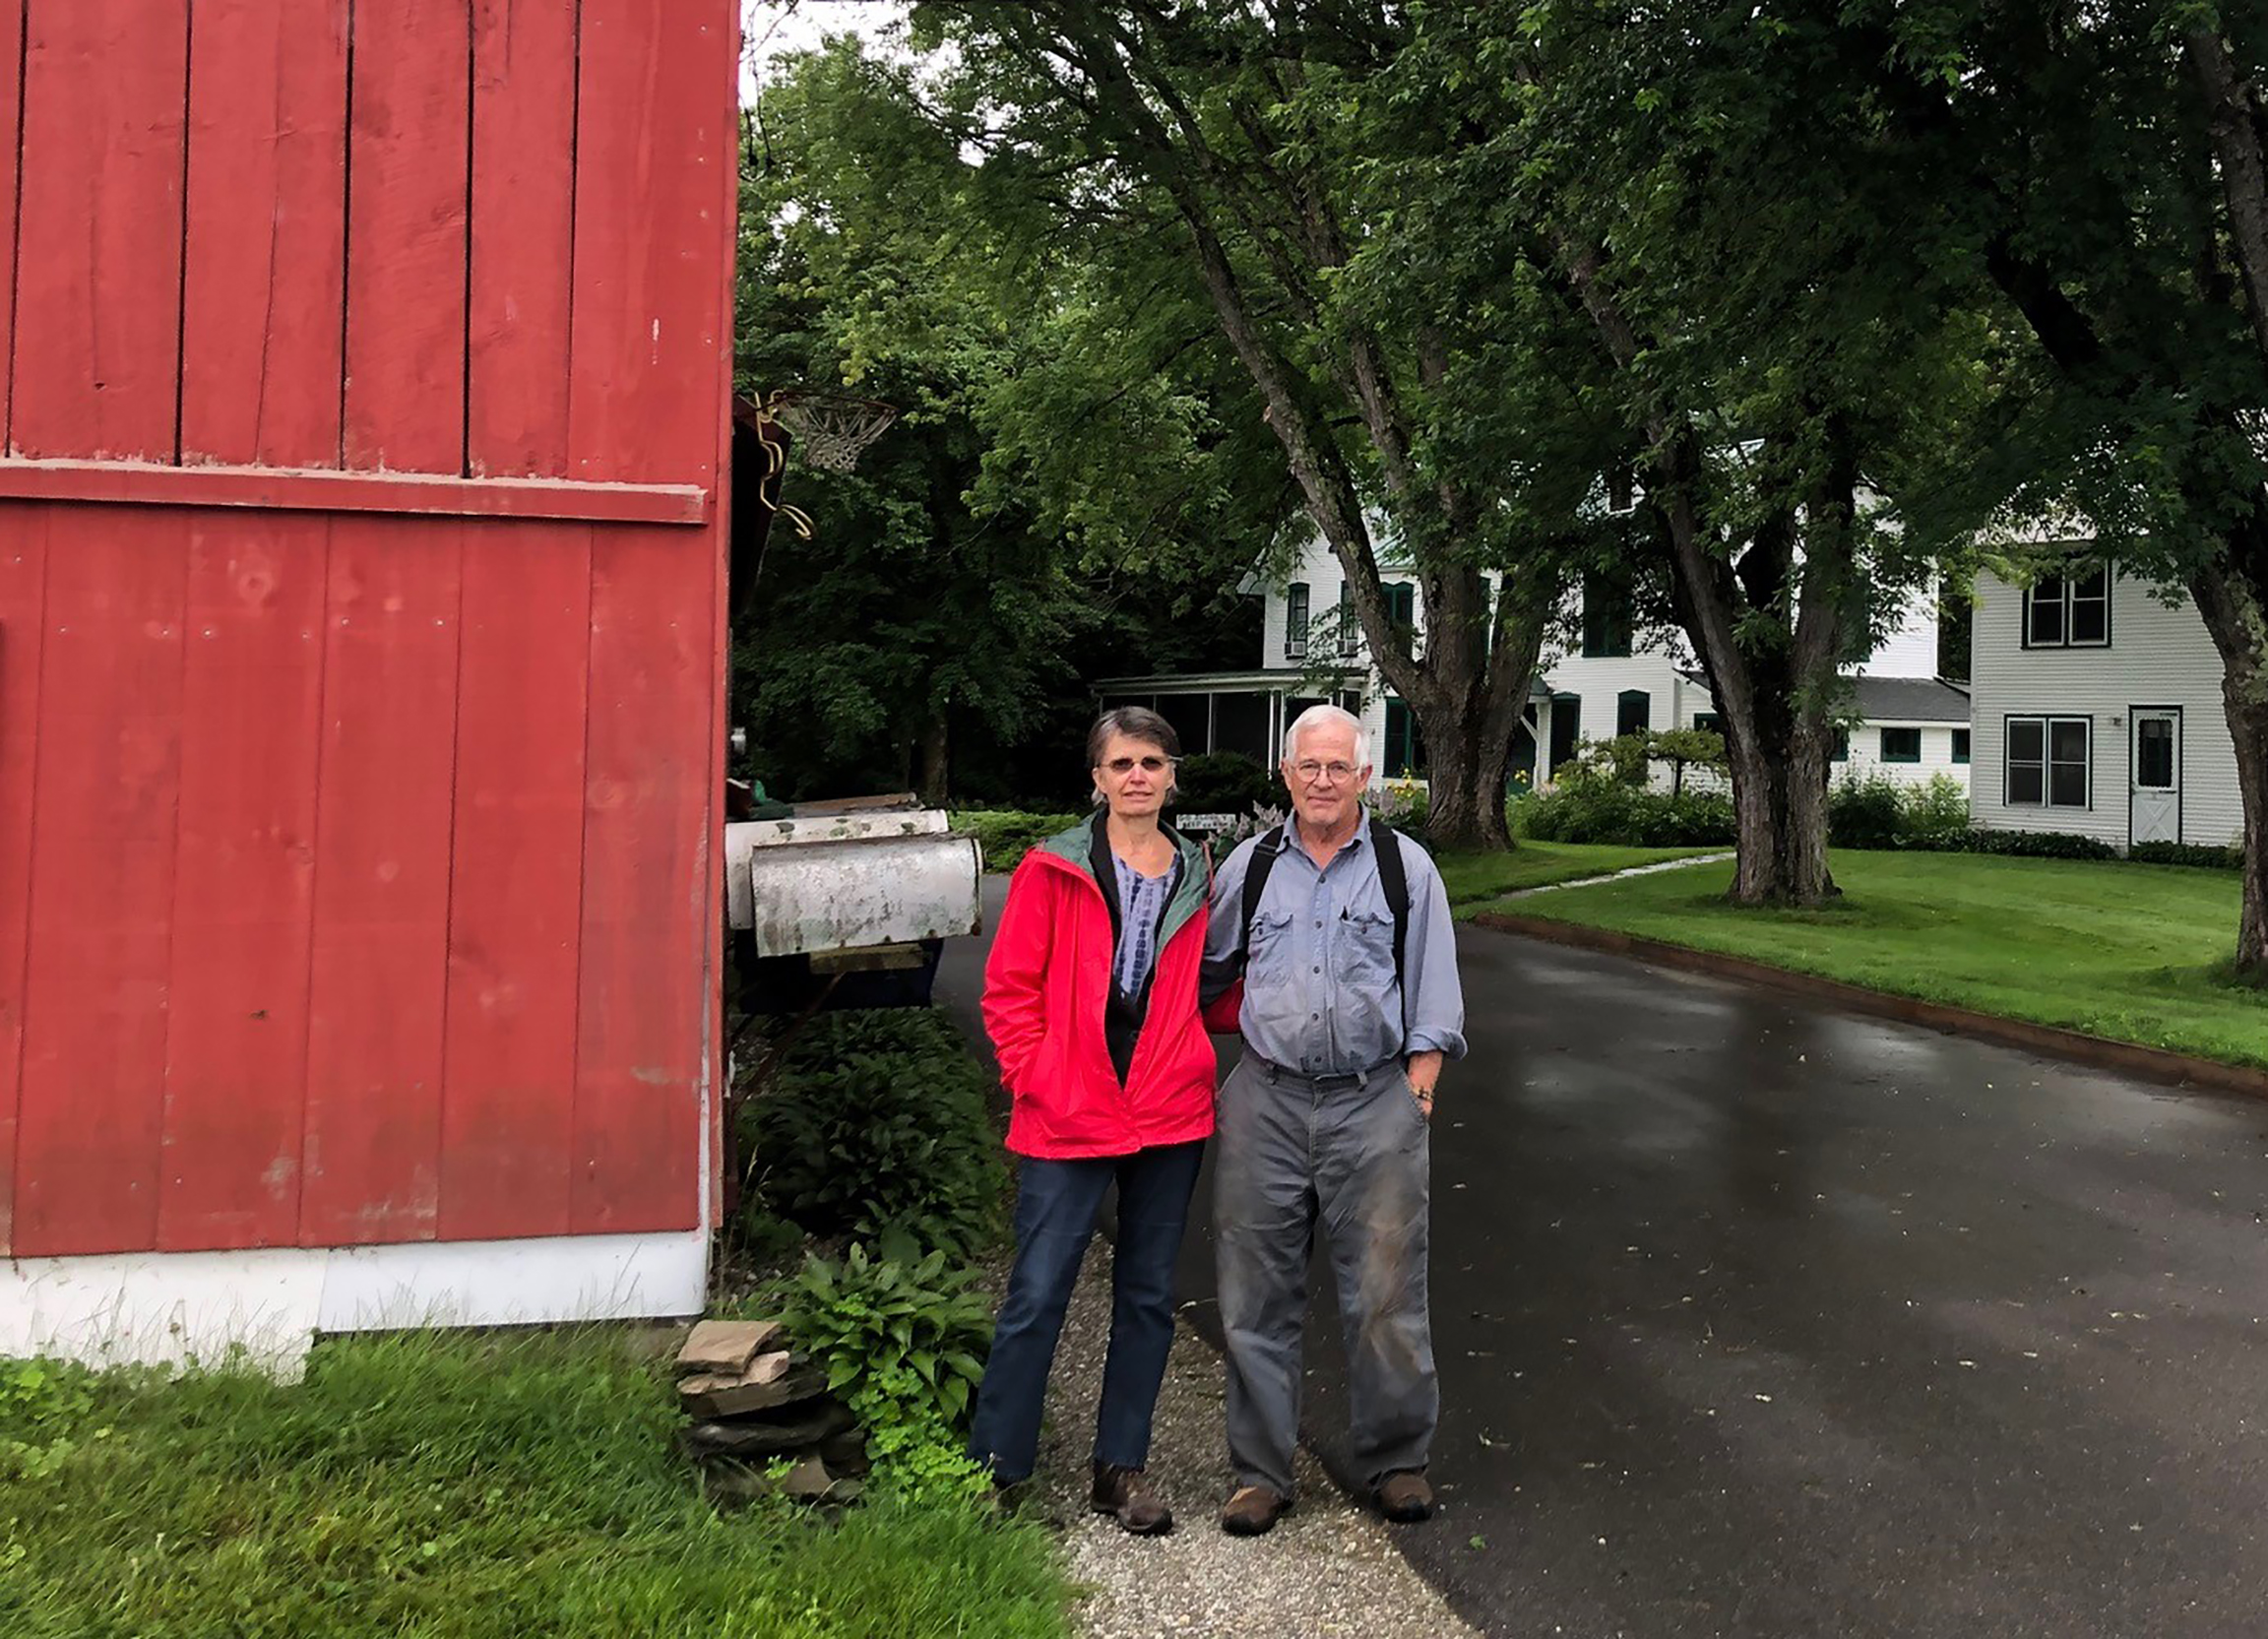 Two people standing next to red barn